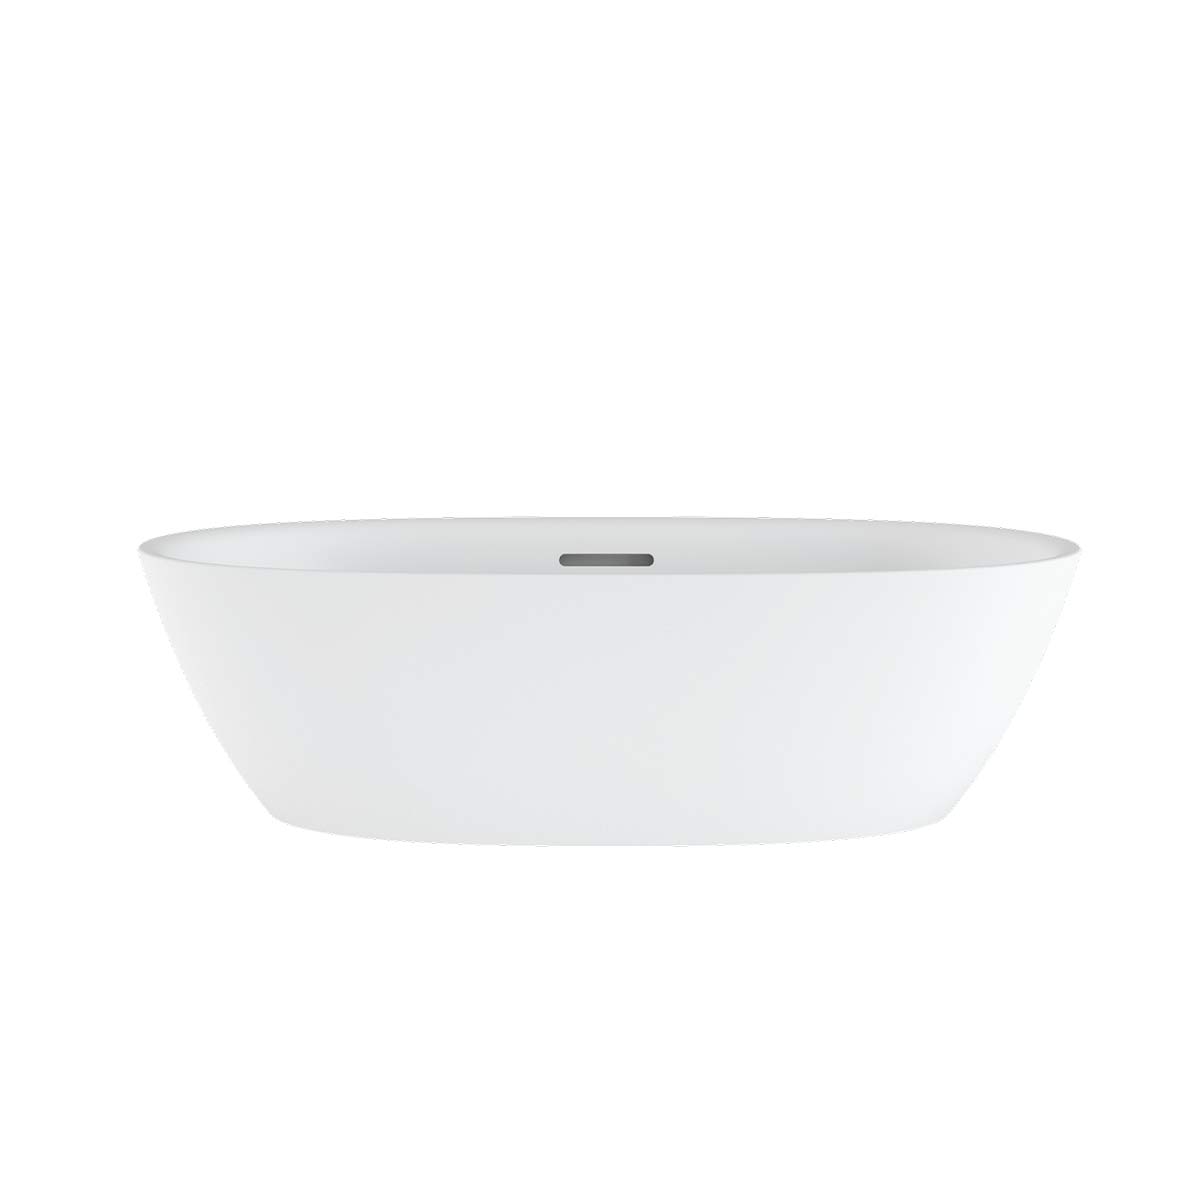 Victoria + Albert Lussari 55 basin in matt white. Also available in gloss white or custom colour exterior paint in any matt or gloss colour. Distributed in Australia by Luxe by Design, Brisbane.